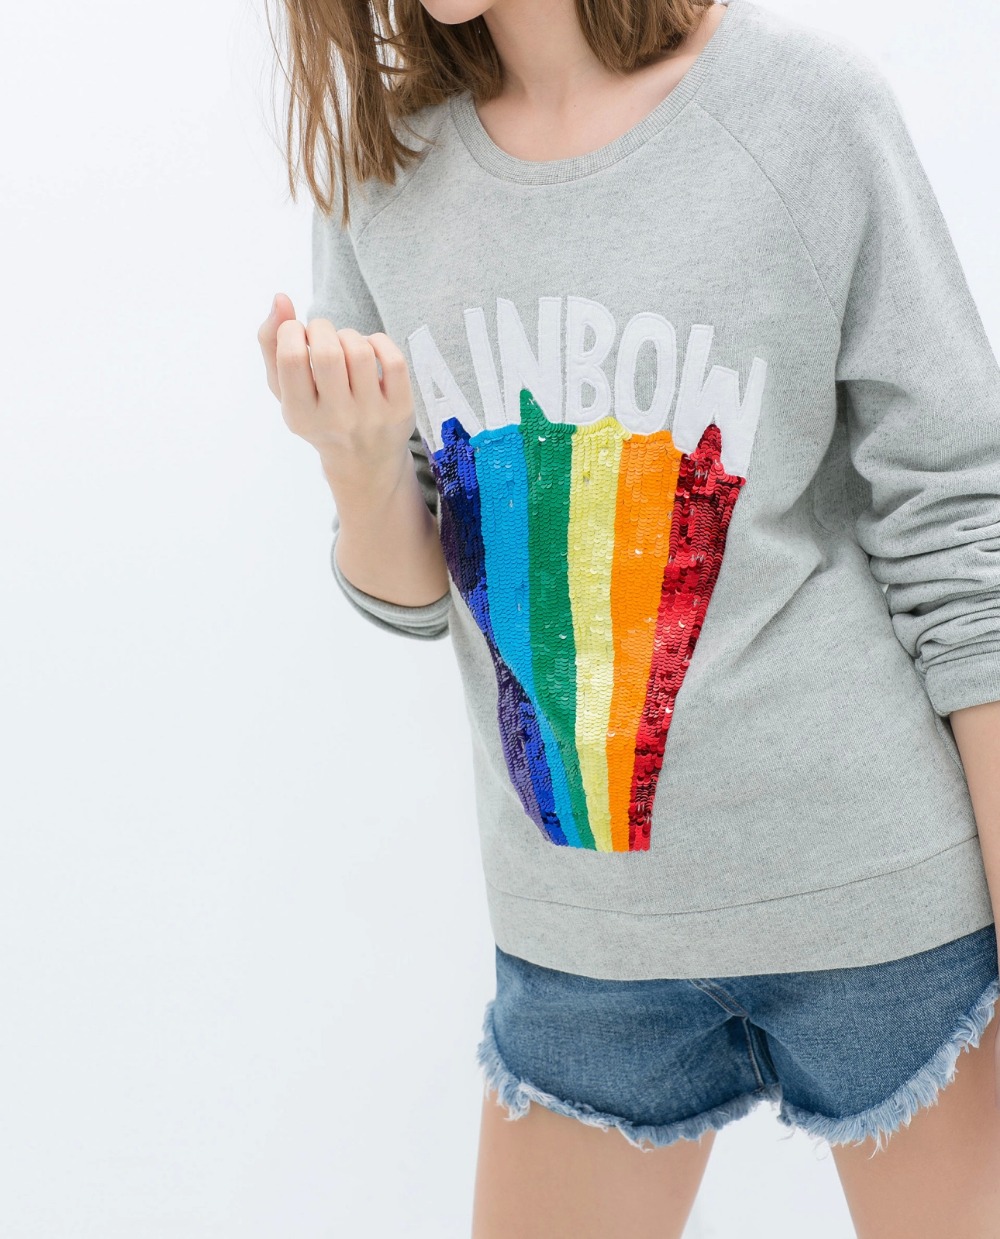 Fashion women elegant Embroidery Sequins rainbow sports pullover outwear Casual O neck long Sleeve shirts Tops